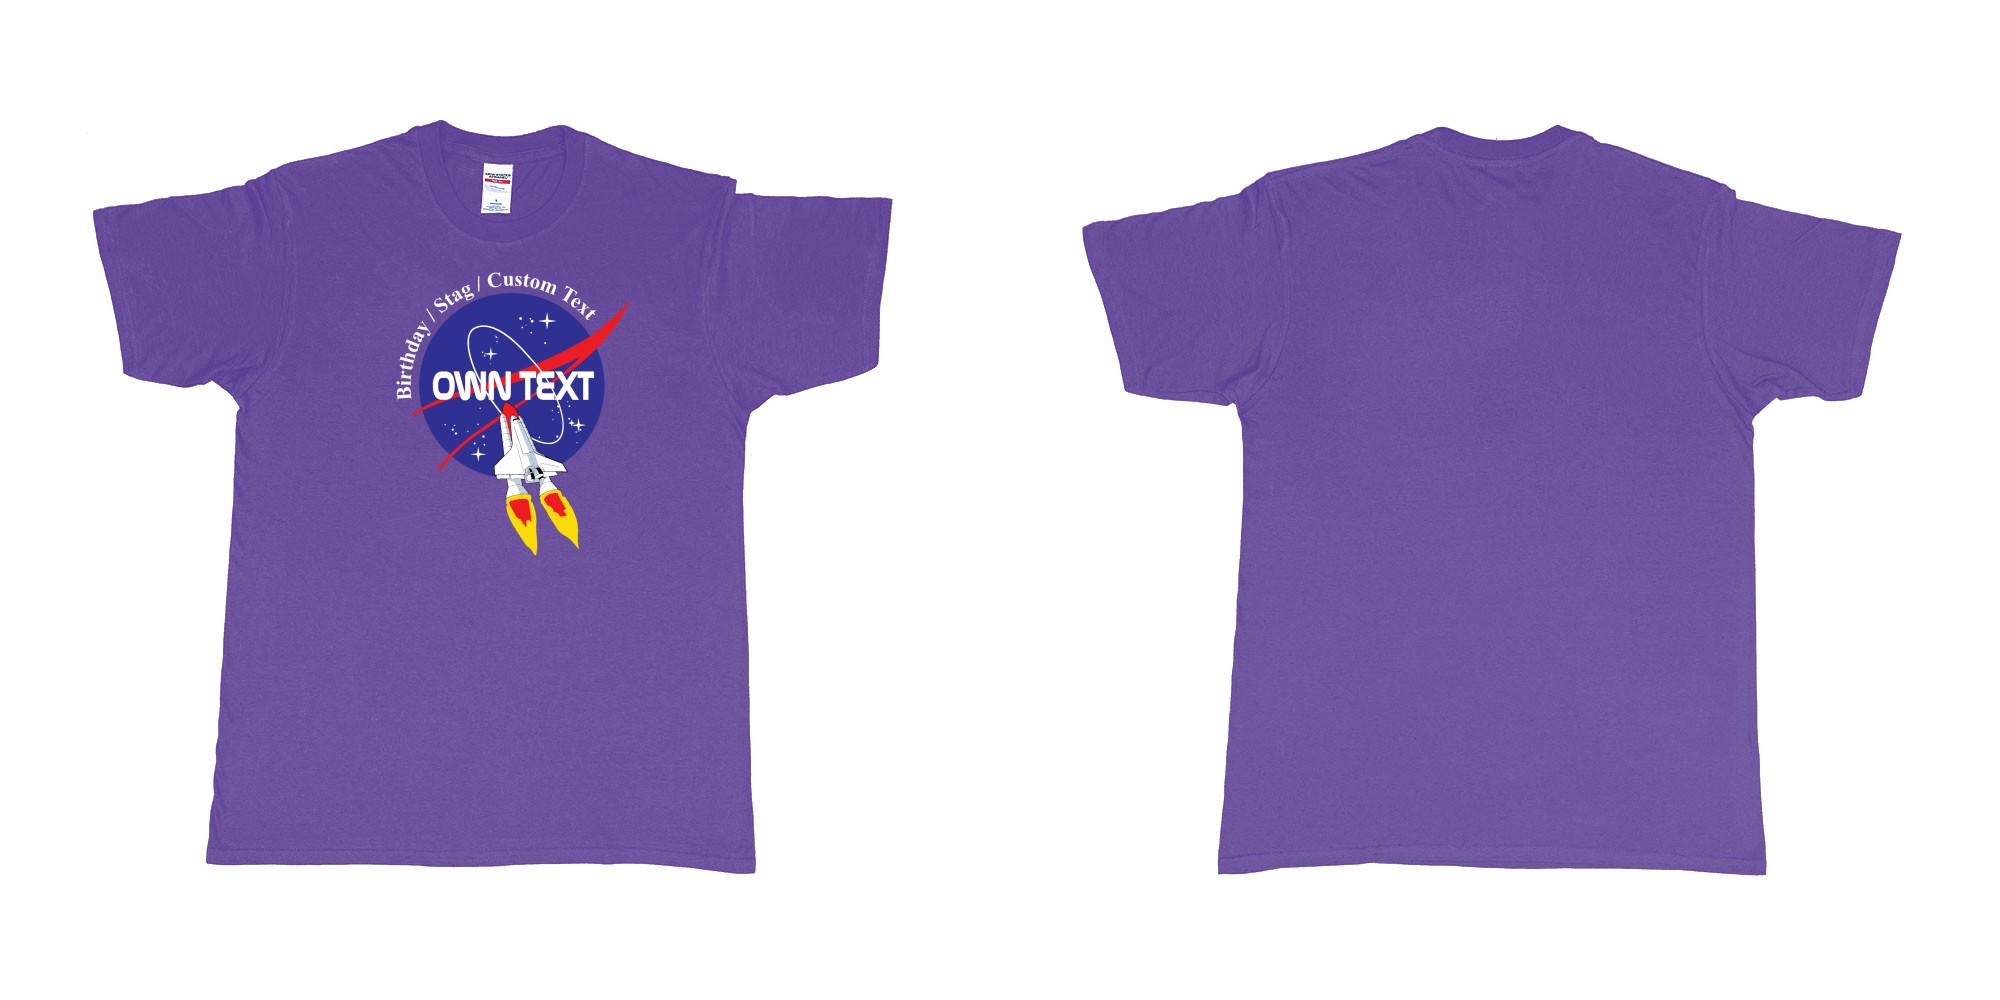 Custom tshirt design nasa logo rocket custom text print in fabric color purple choice your own text made in Bali by The Pirate Way